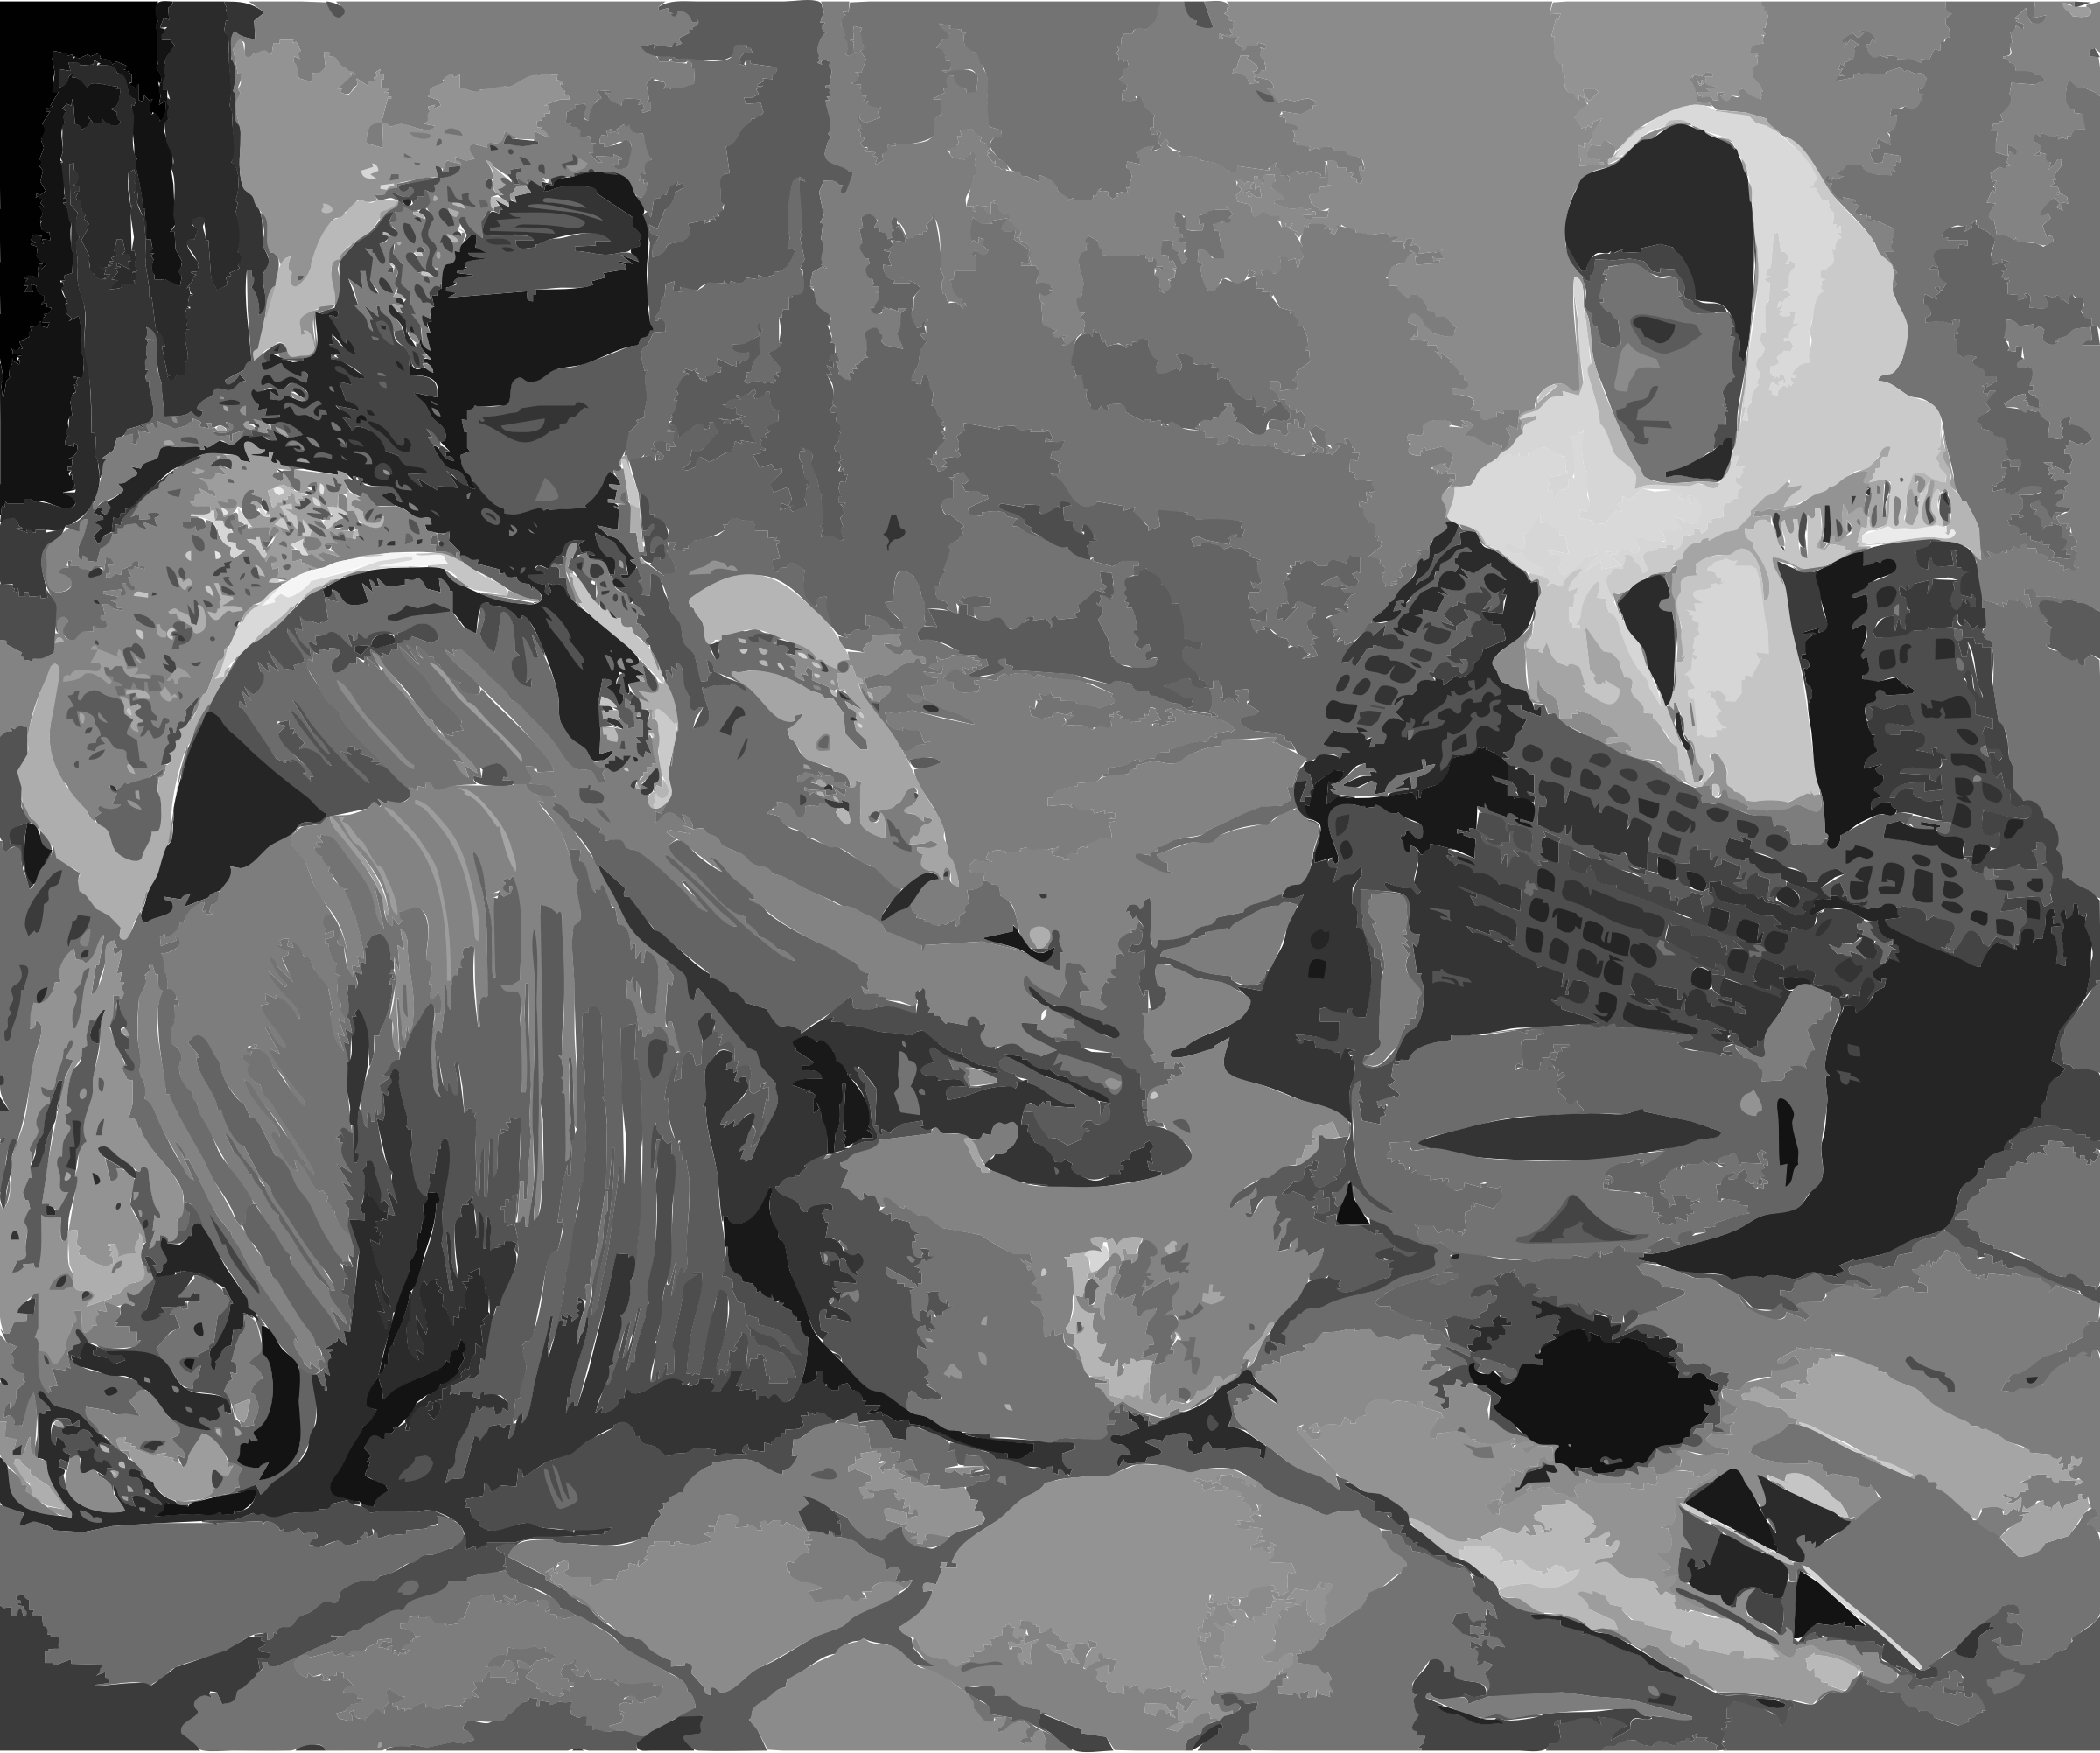 Palestinian women grinding coffee beans SVG Clip arts